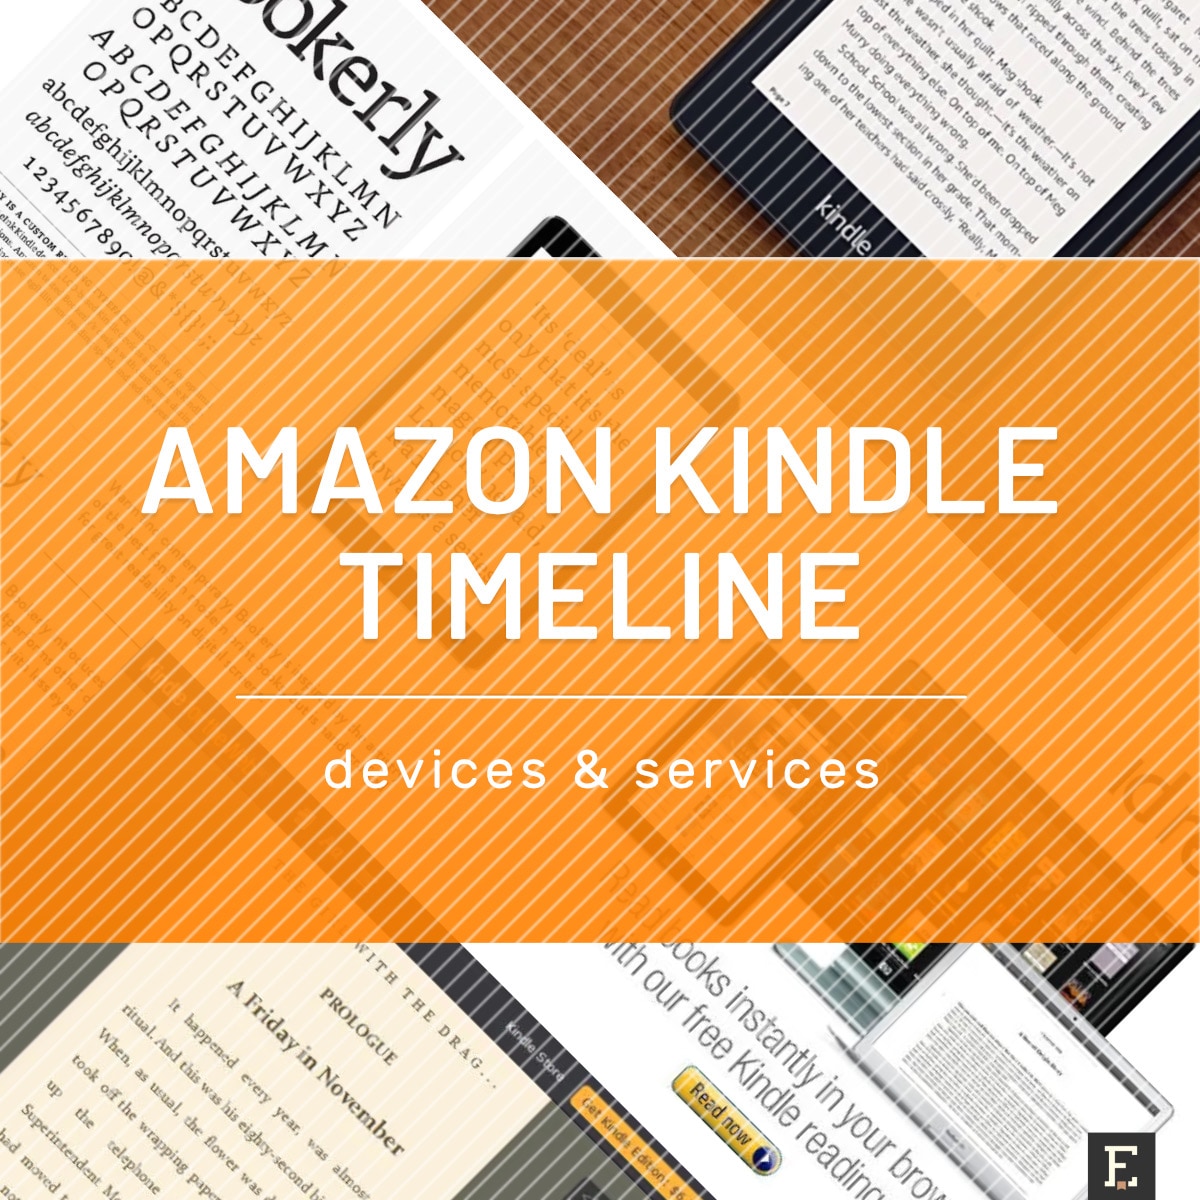 A fascinating history of Kindle devices and services